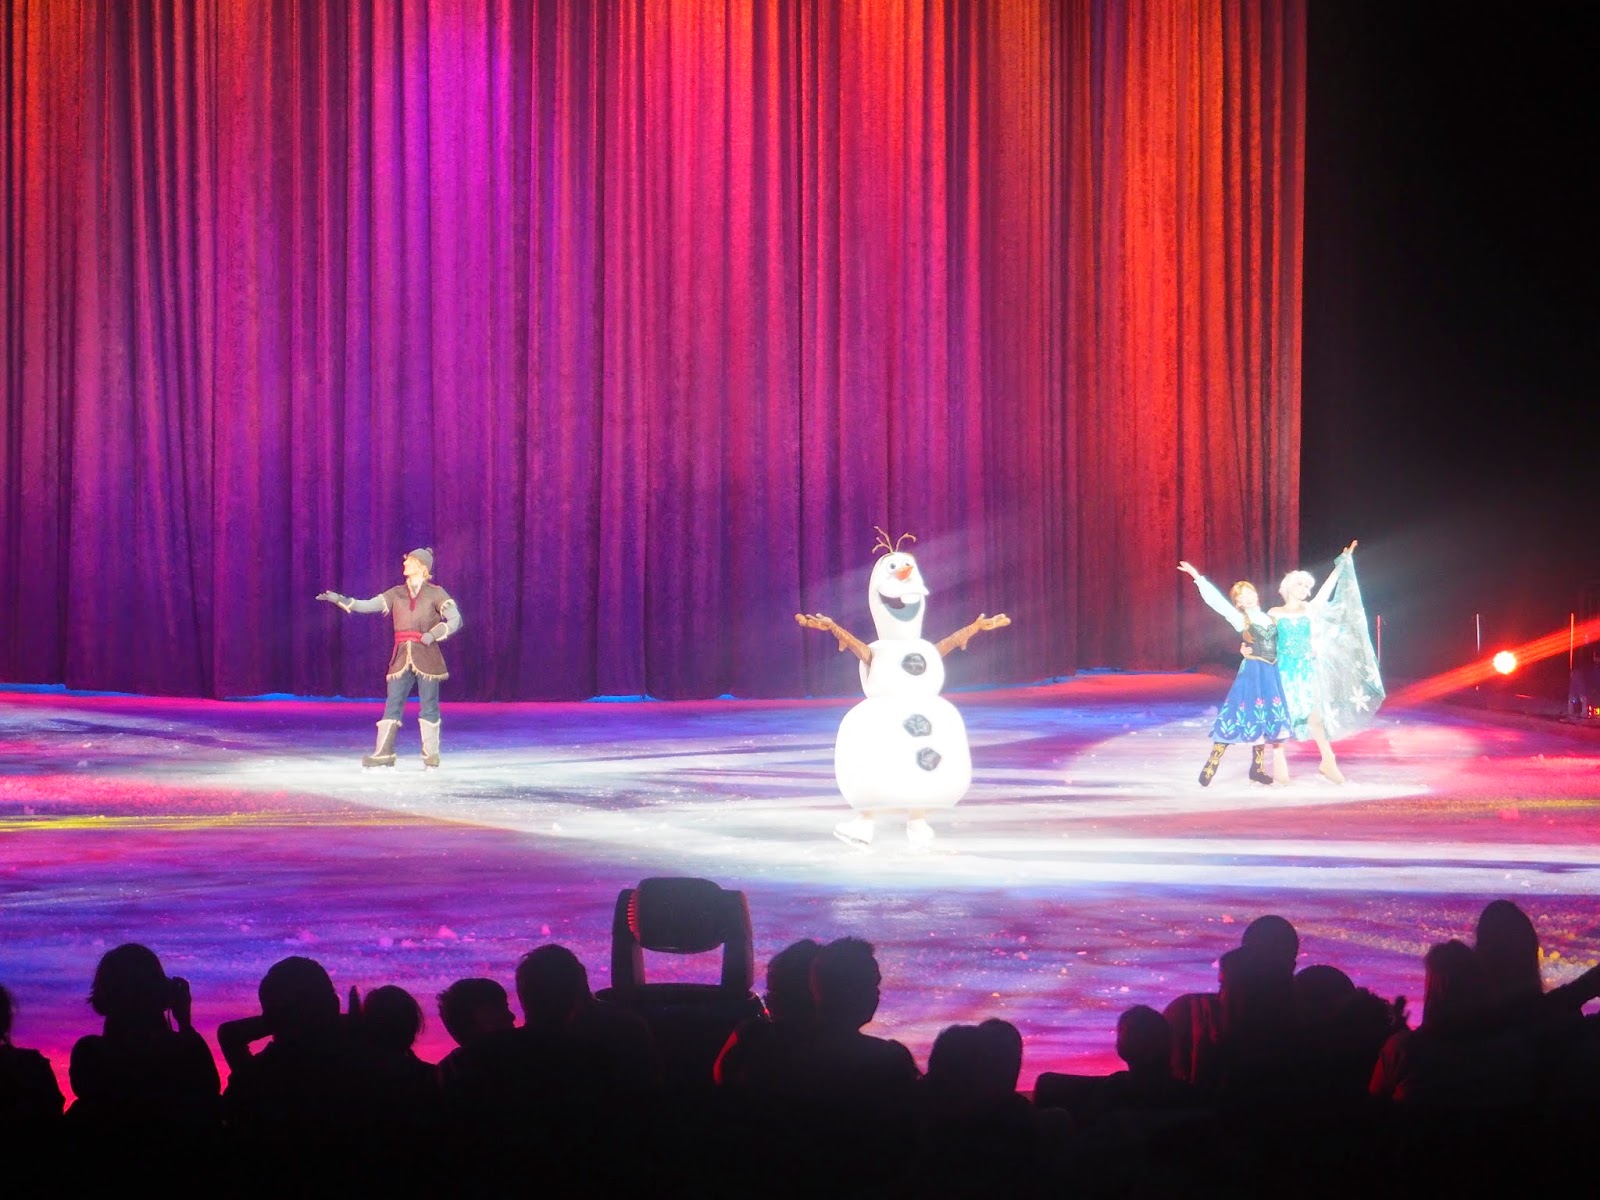 mamasVIb | V. I. BASH: 10 reasons why you should not miss Disney on Ice - Magical Ice Festival | disney on ice | magical ice festival | disney | ice skating | frozen | figure skaters | wmbely arena | press event | mama VIb | dishy on ice | skating | mickey mouse | meet and great | celebrity | red carpet | disney characters | anna dan elsa from frozen | kids event | nights out for kids | lonodn | event for children | days out 